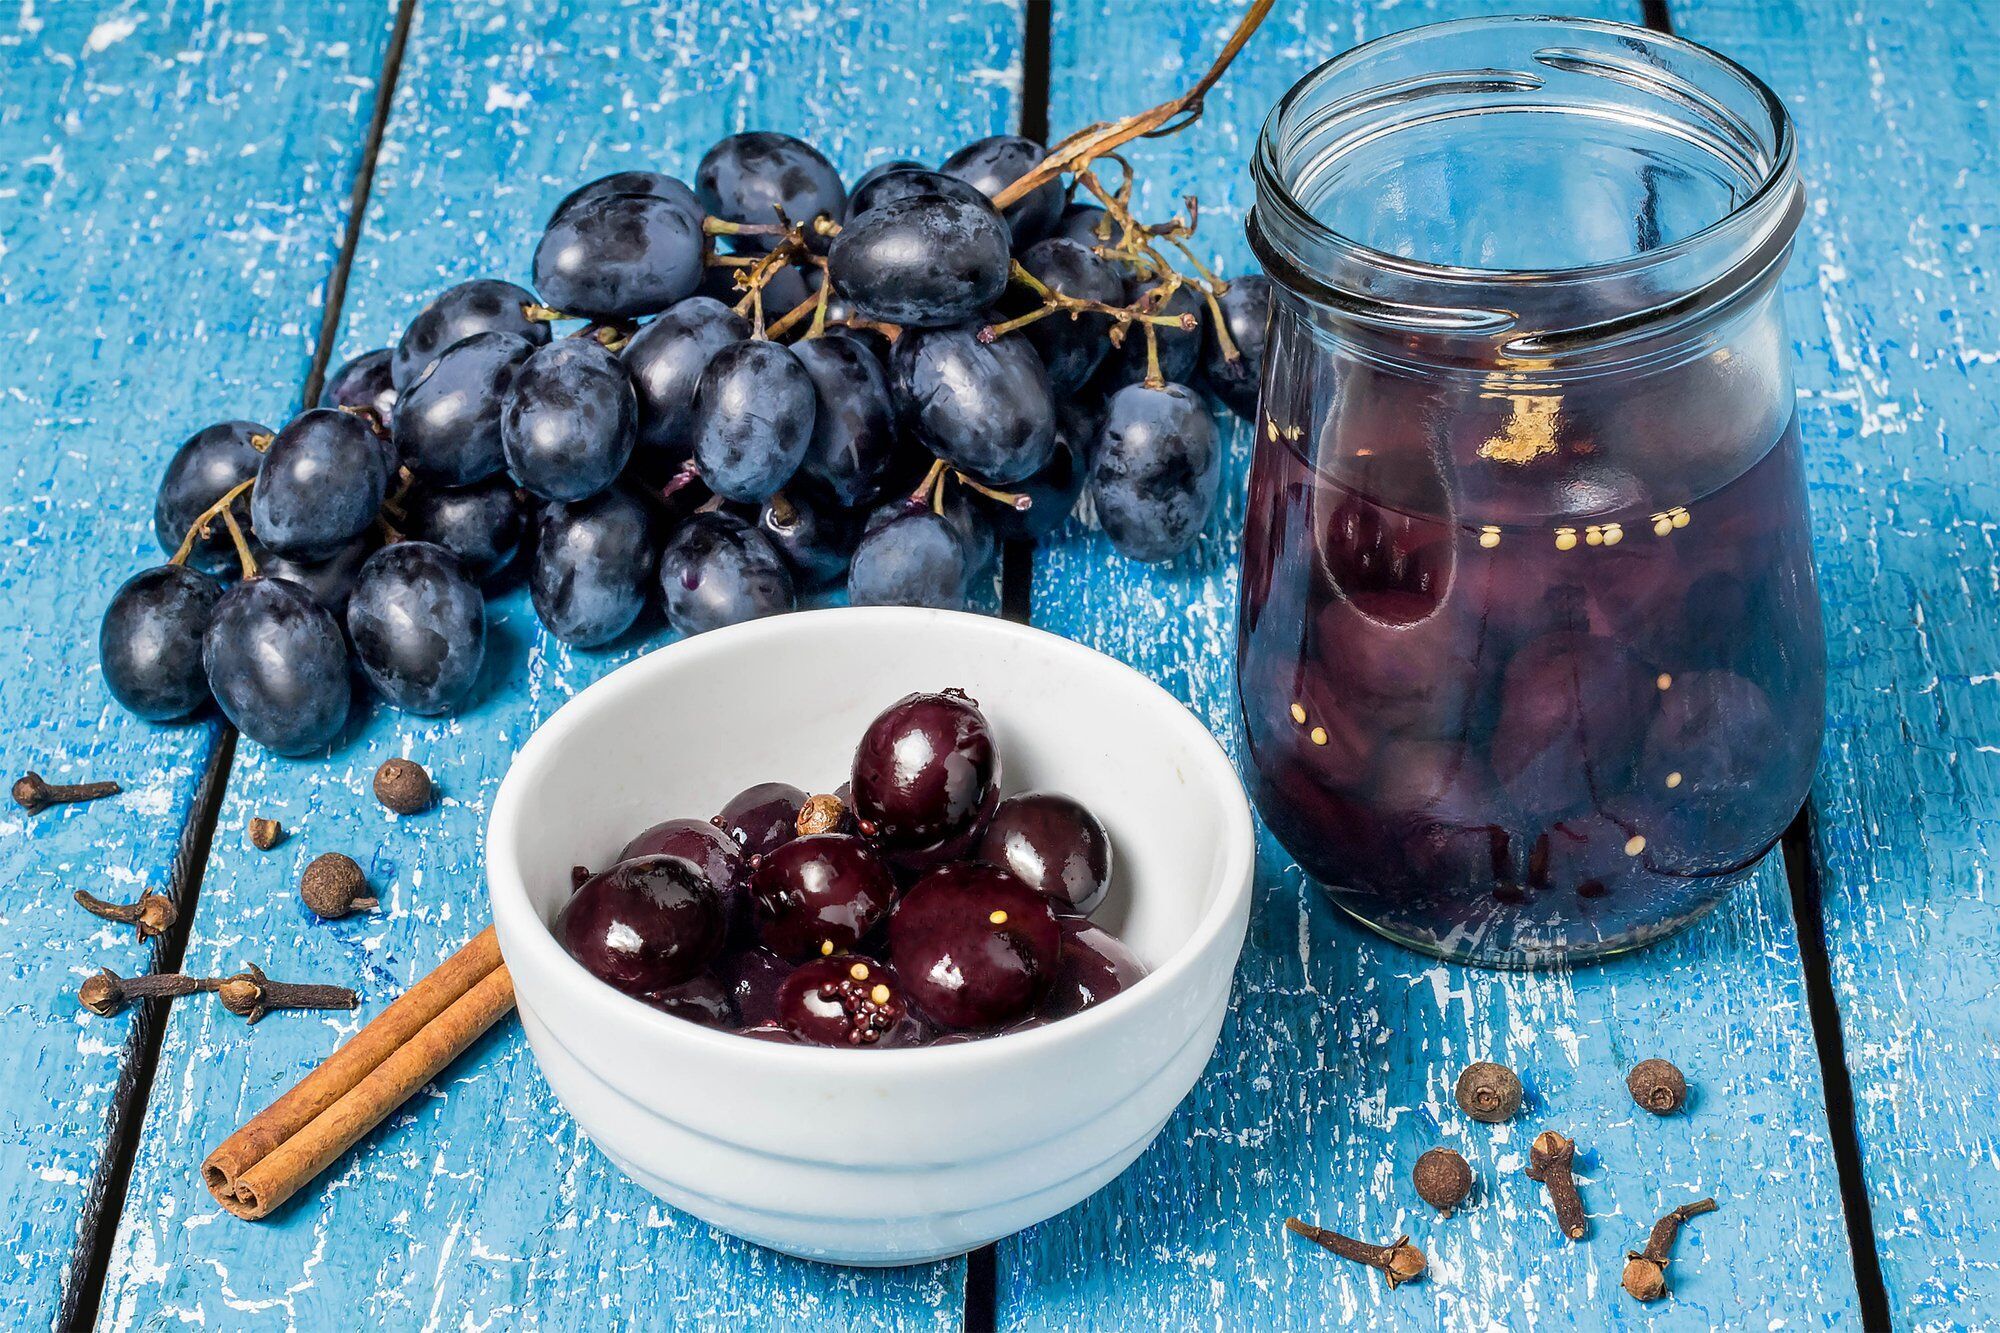 Pickled black grapes for the winter